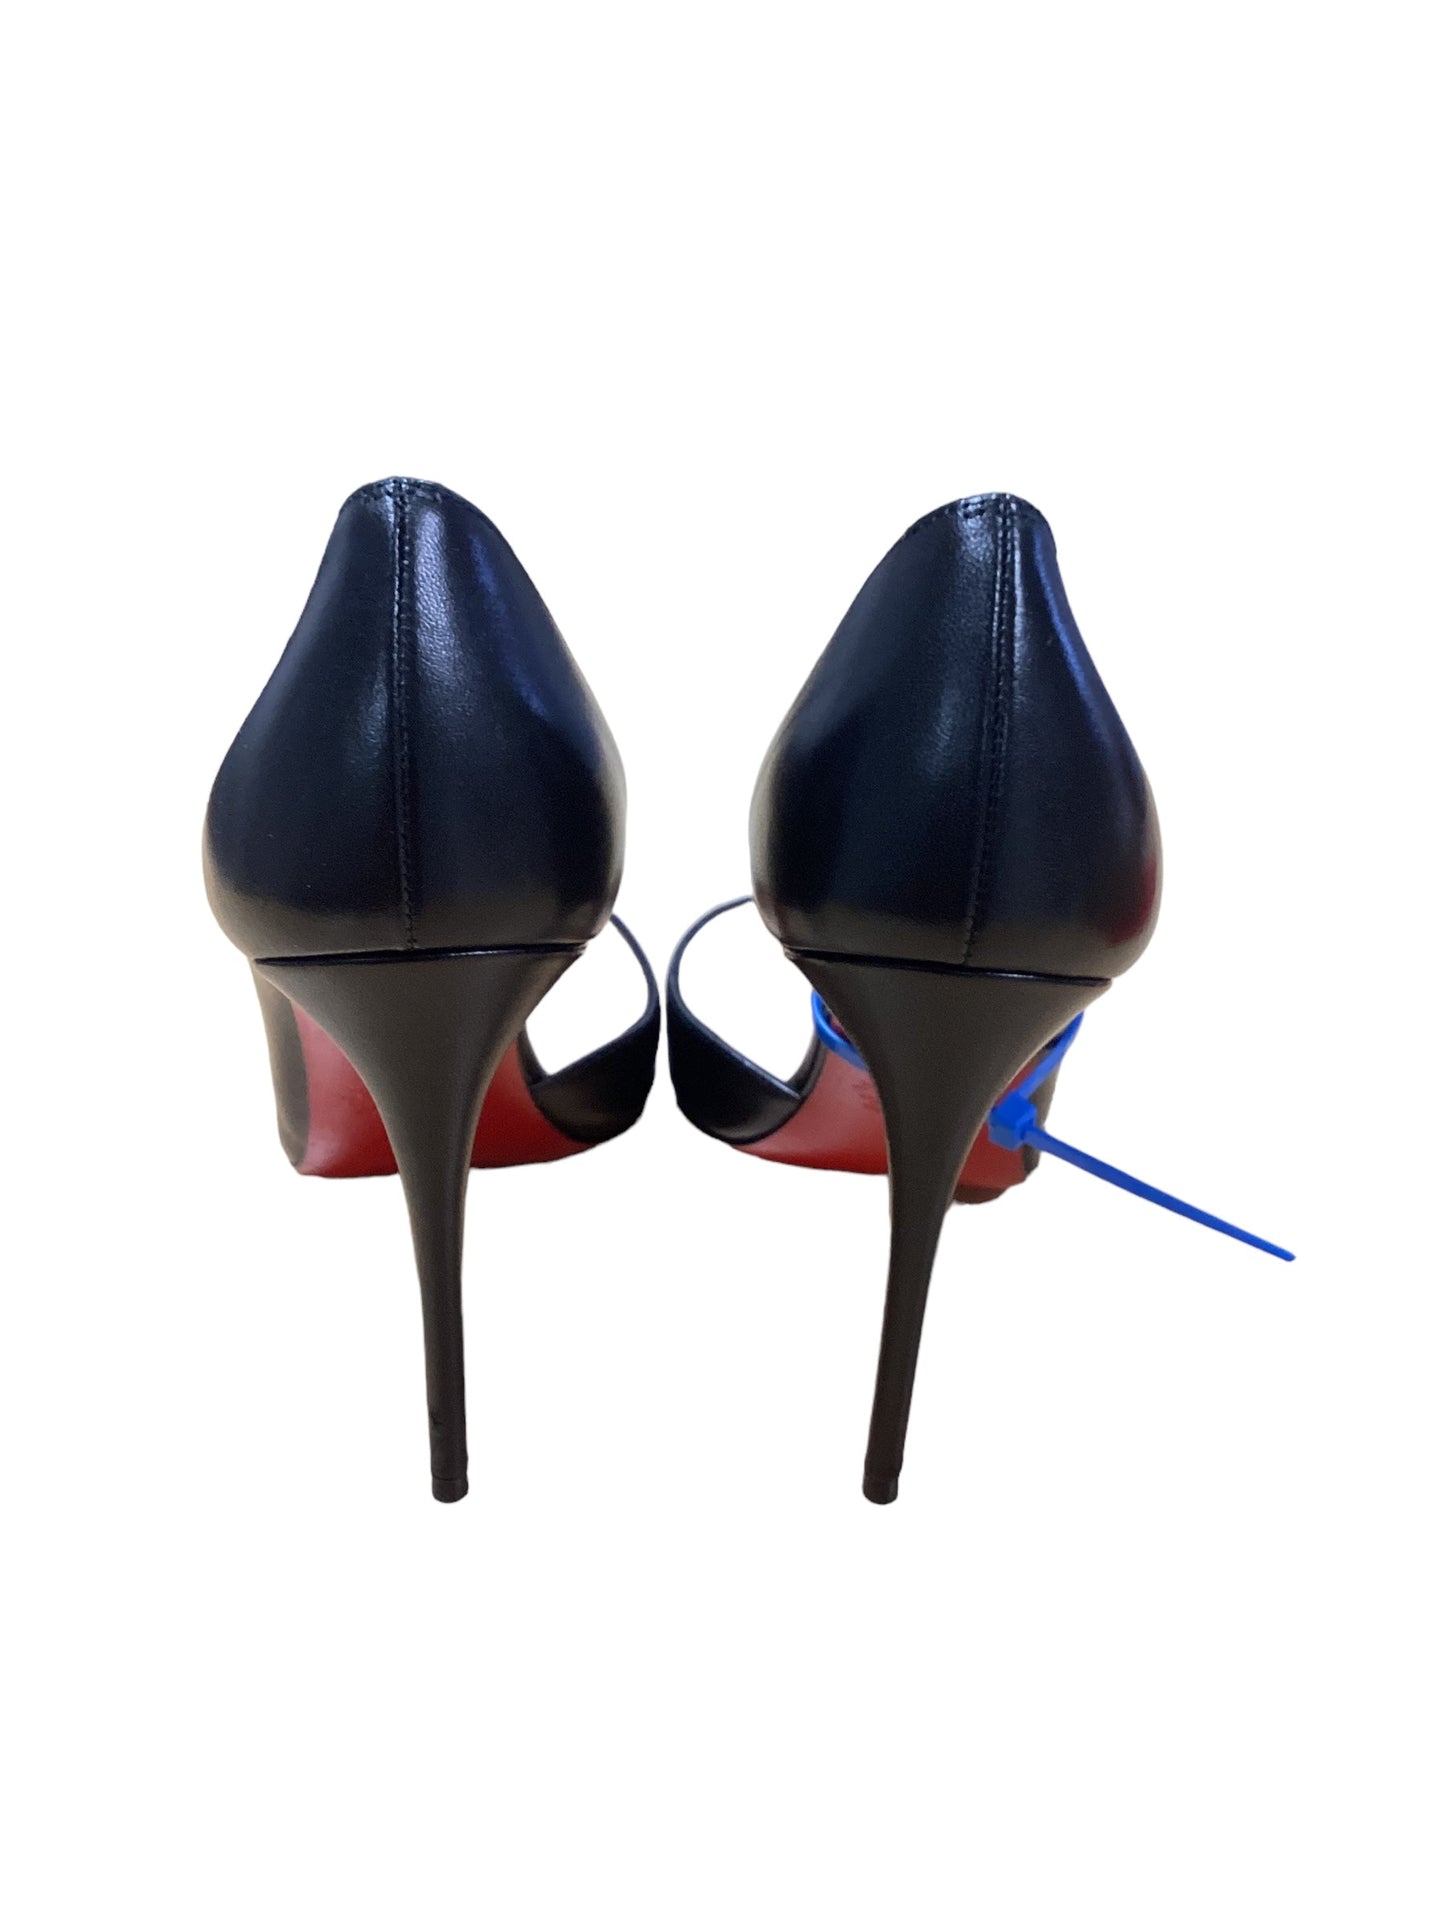 Shoes Luxury Designer By Christian Louboutin  Size: 7.5